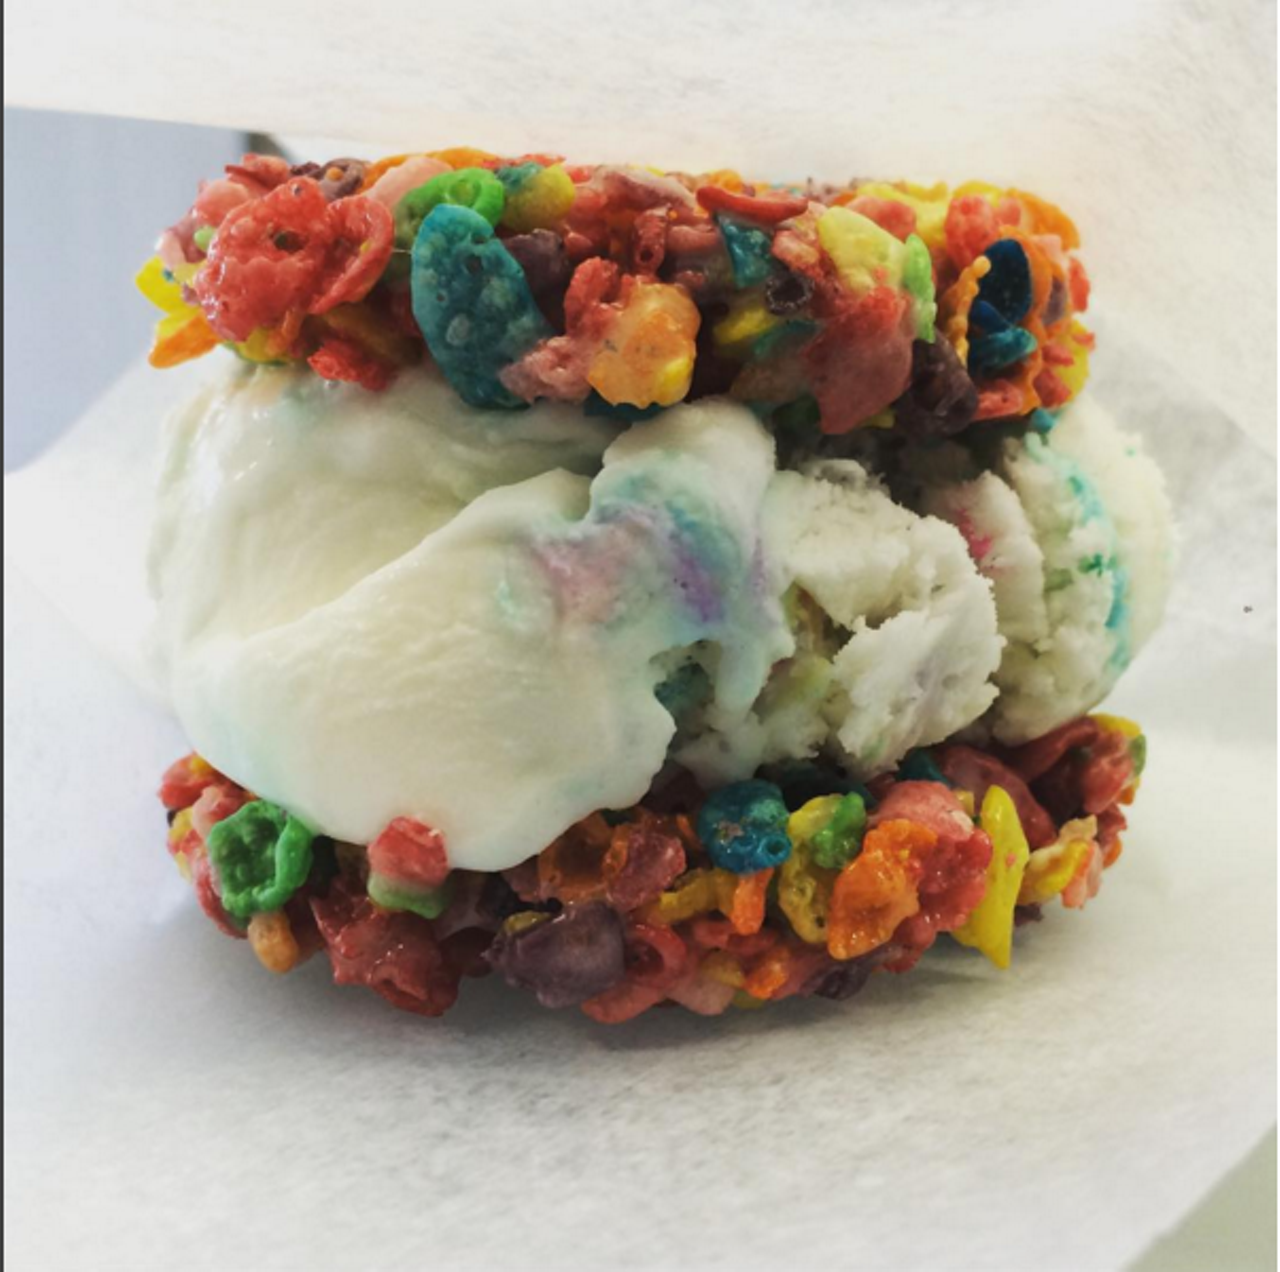 Ice Cream Sandwich
Gable's Ice Cream Sandwiches
9708 Business Pkwy., Suite 102, gablesicecream.com
I've got a bit of a sweet tooth...And Fruity Pebble cookies were a thing.